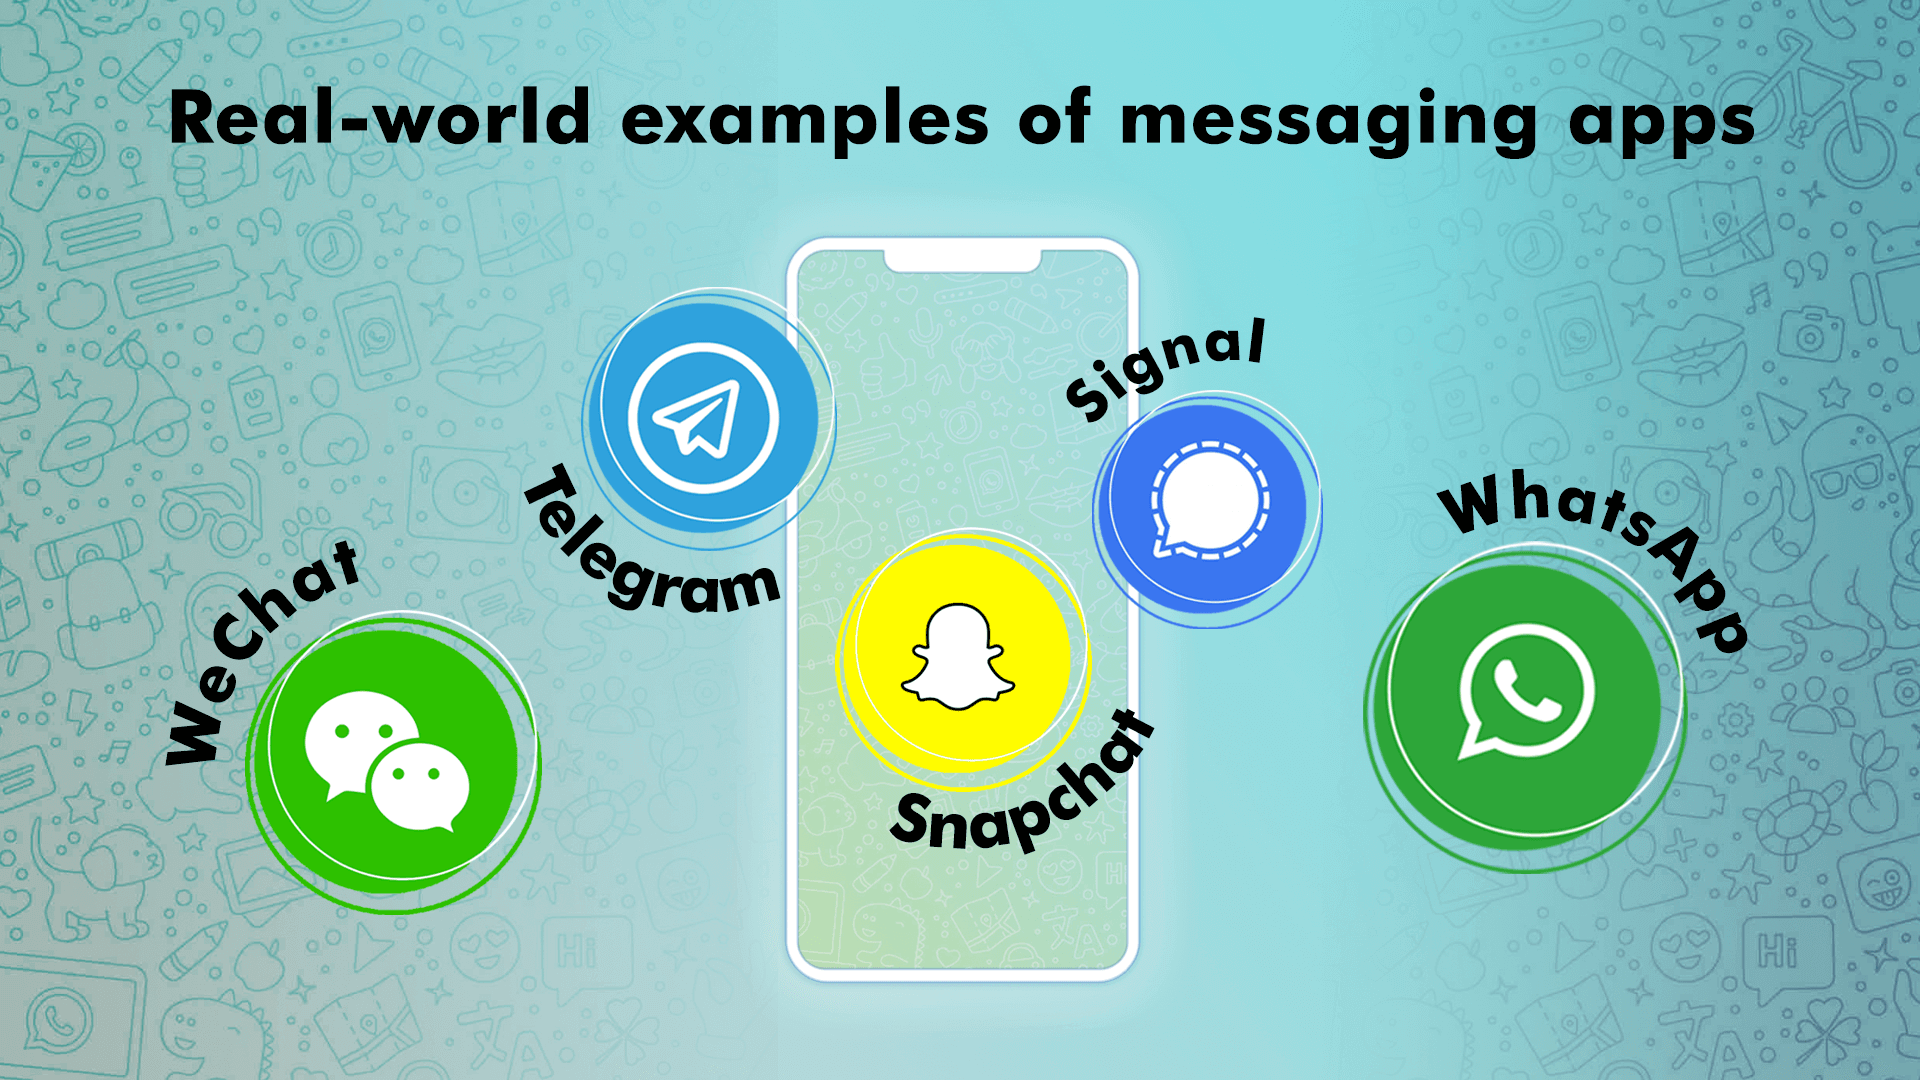 Real-world examples of messaging apps